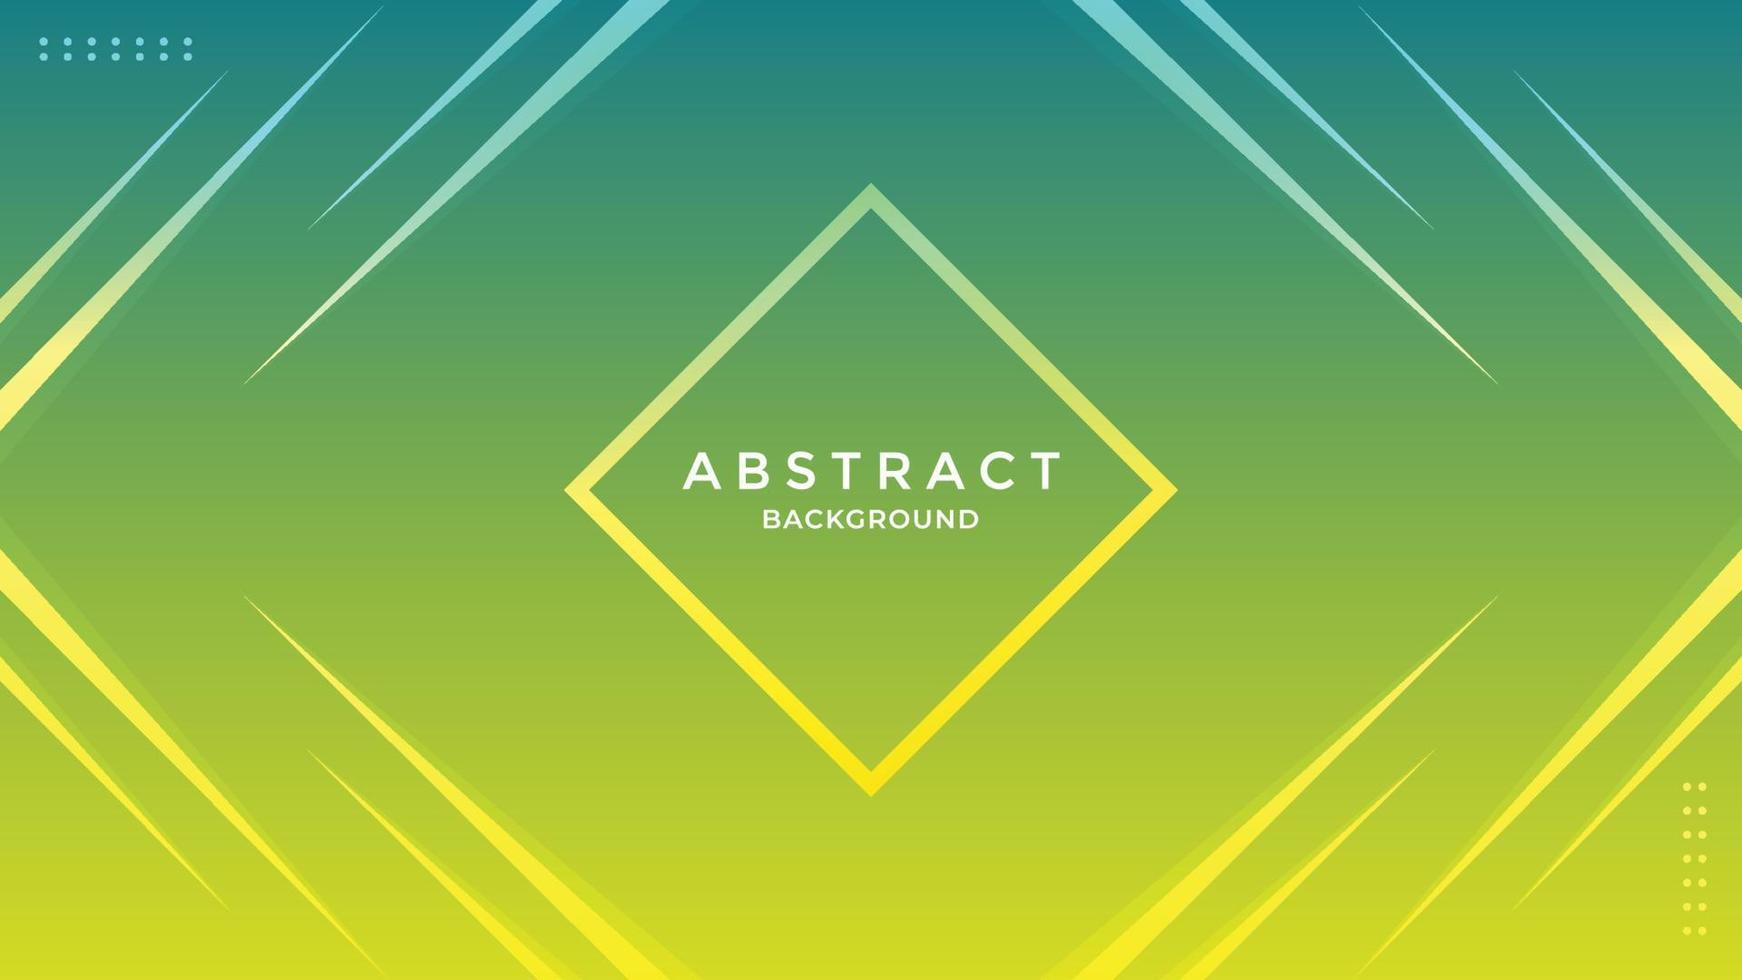 Abstract background with lines design template vector